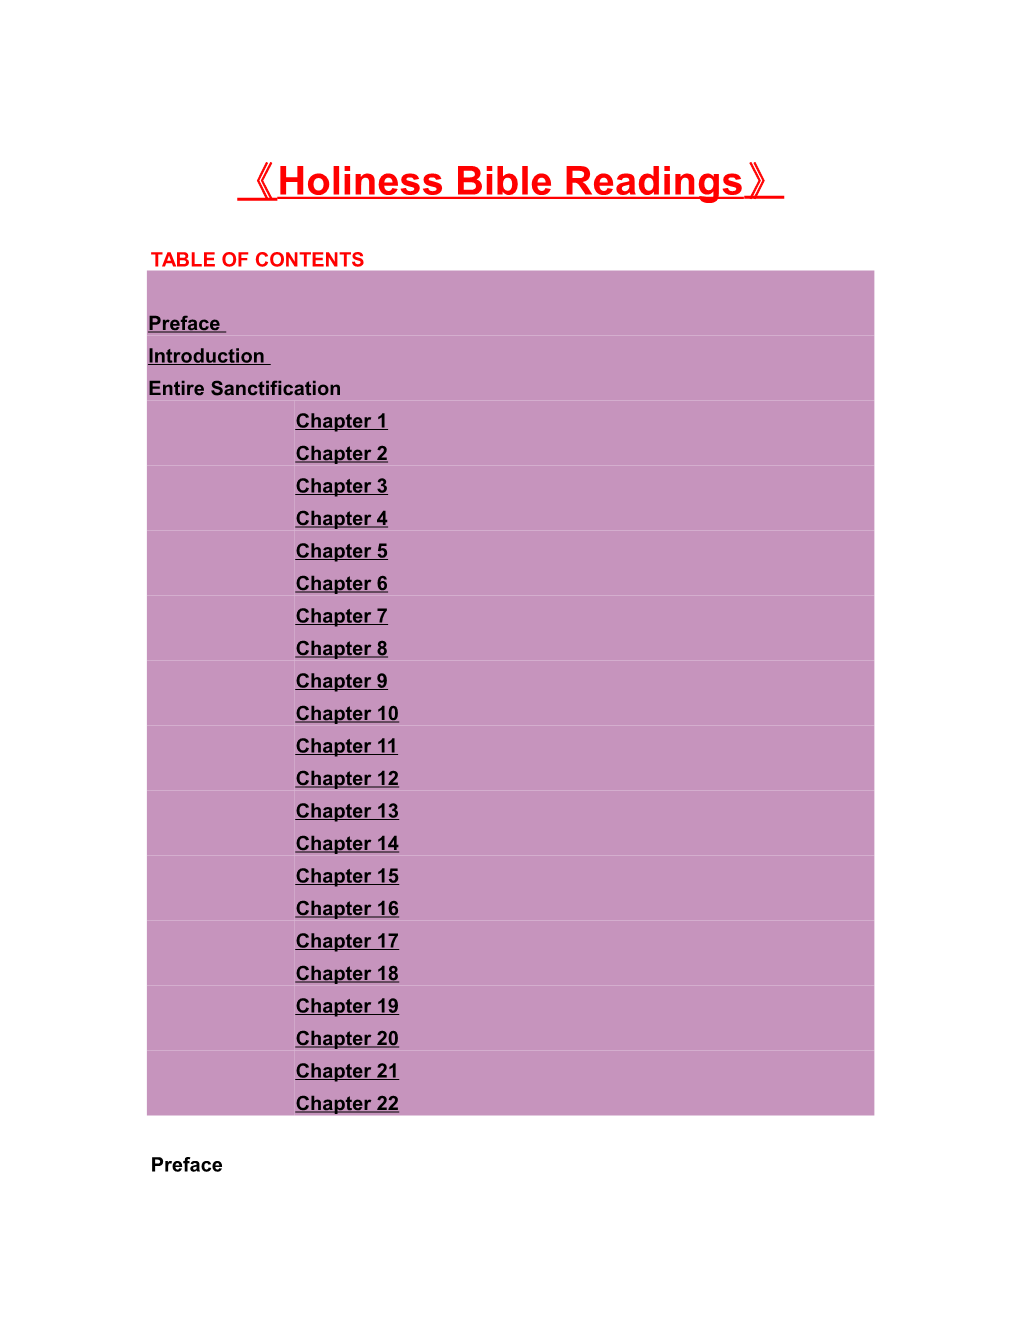 Holiness Bible Readings